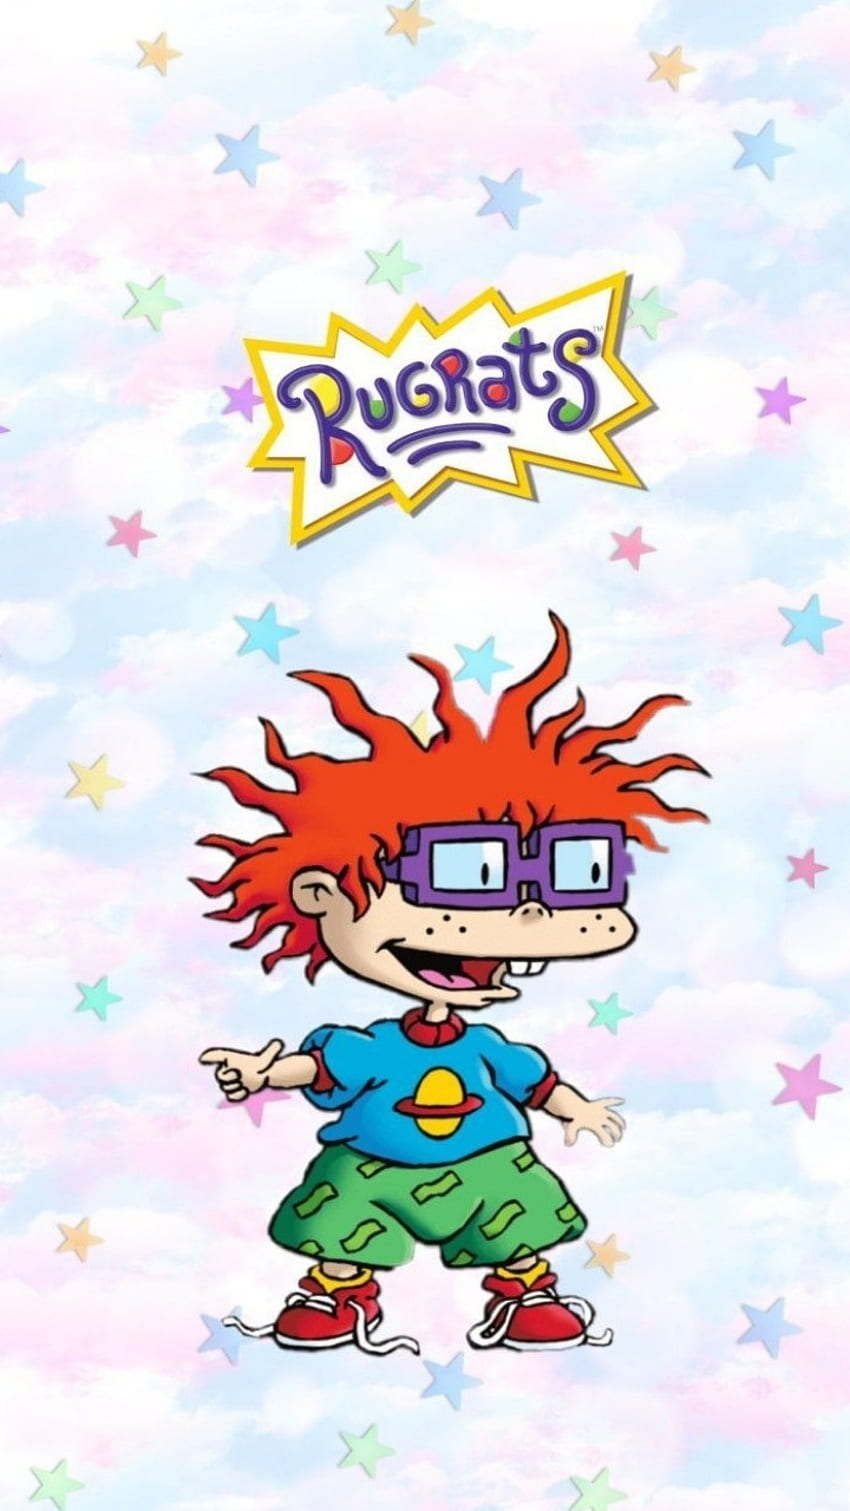 Iphone wallpaper rugrats chuckie Finest wallpaper for phone - Rugrats